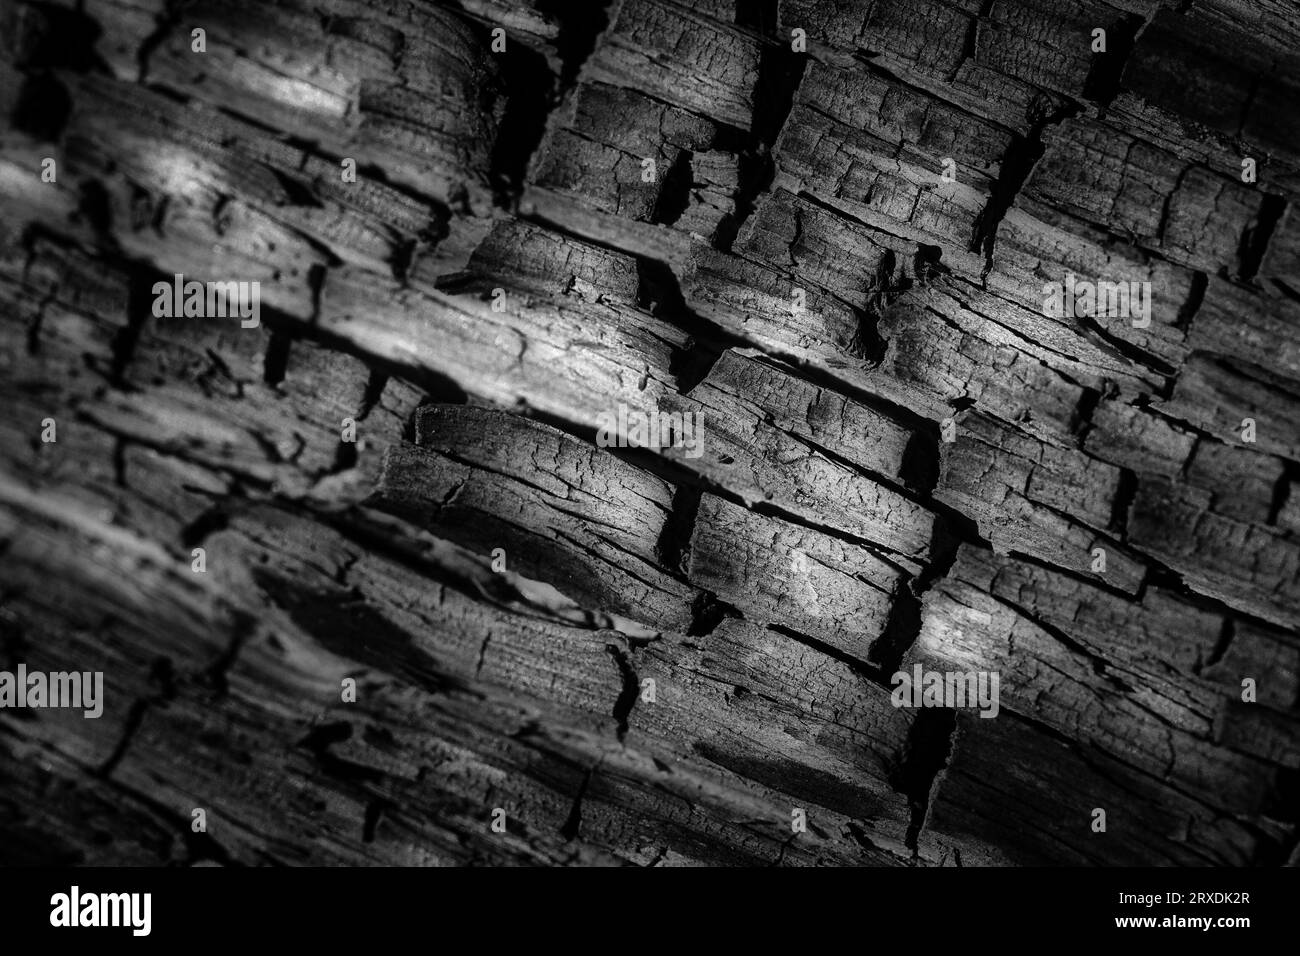 A mesmerizing play between light and shadows on the texture of charred wood.Captivating details emerge in the monochromatic palette of black and white Stock Photo